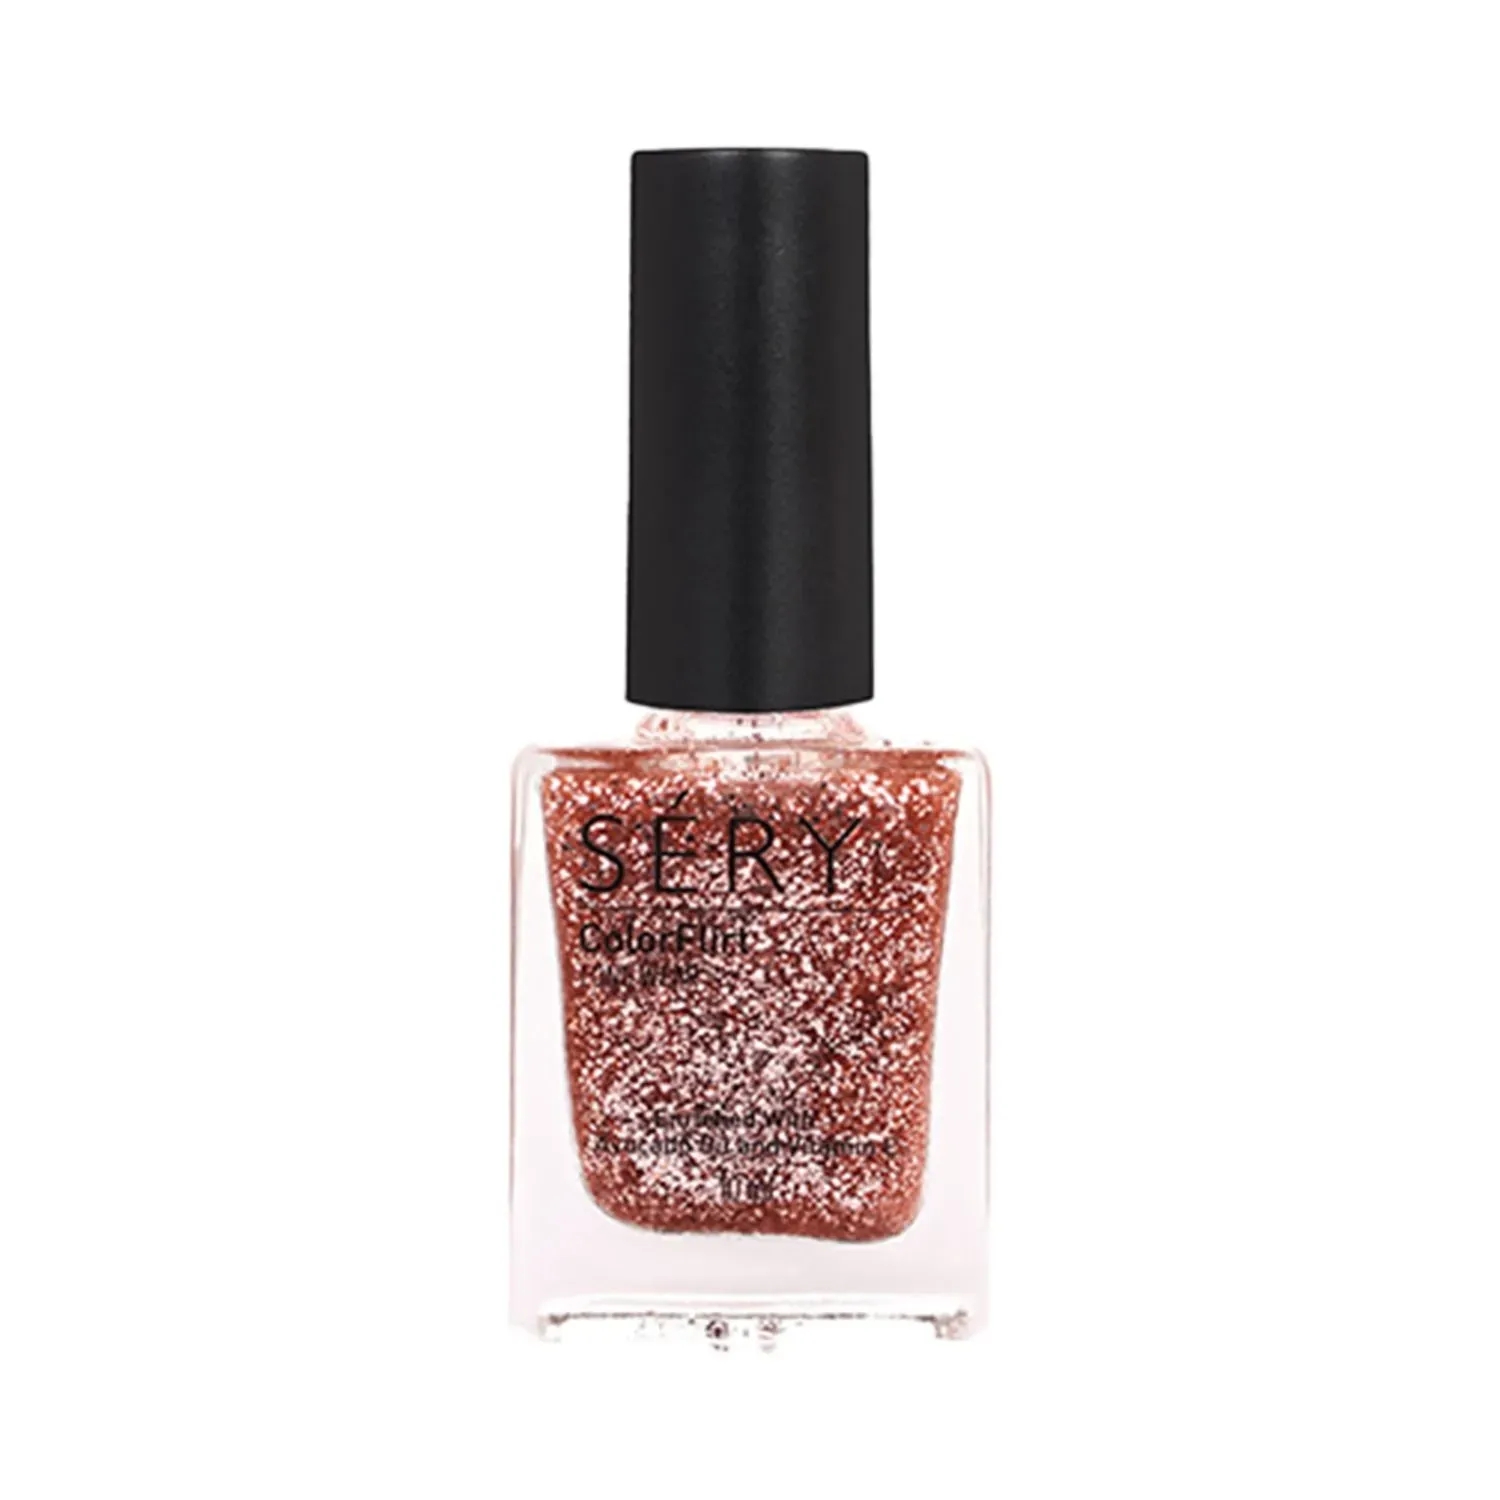 NICOLE DIARY Nail Polish Set Pearl Shimmer Glitter Nail Varnish Transparent  Shell Manicure Art Stamp Lacquer From Heheda2, $35.47 | DHgate.Com